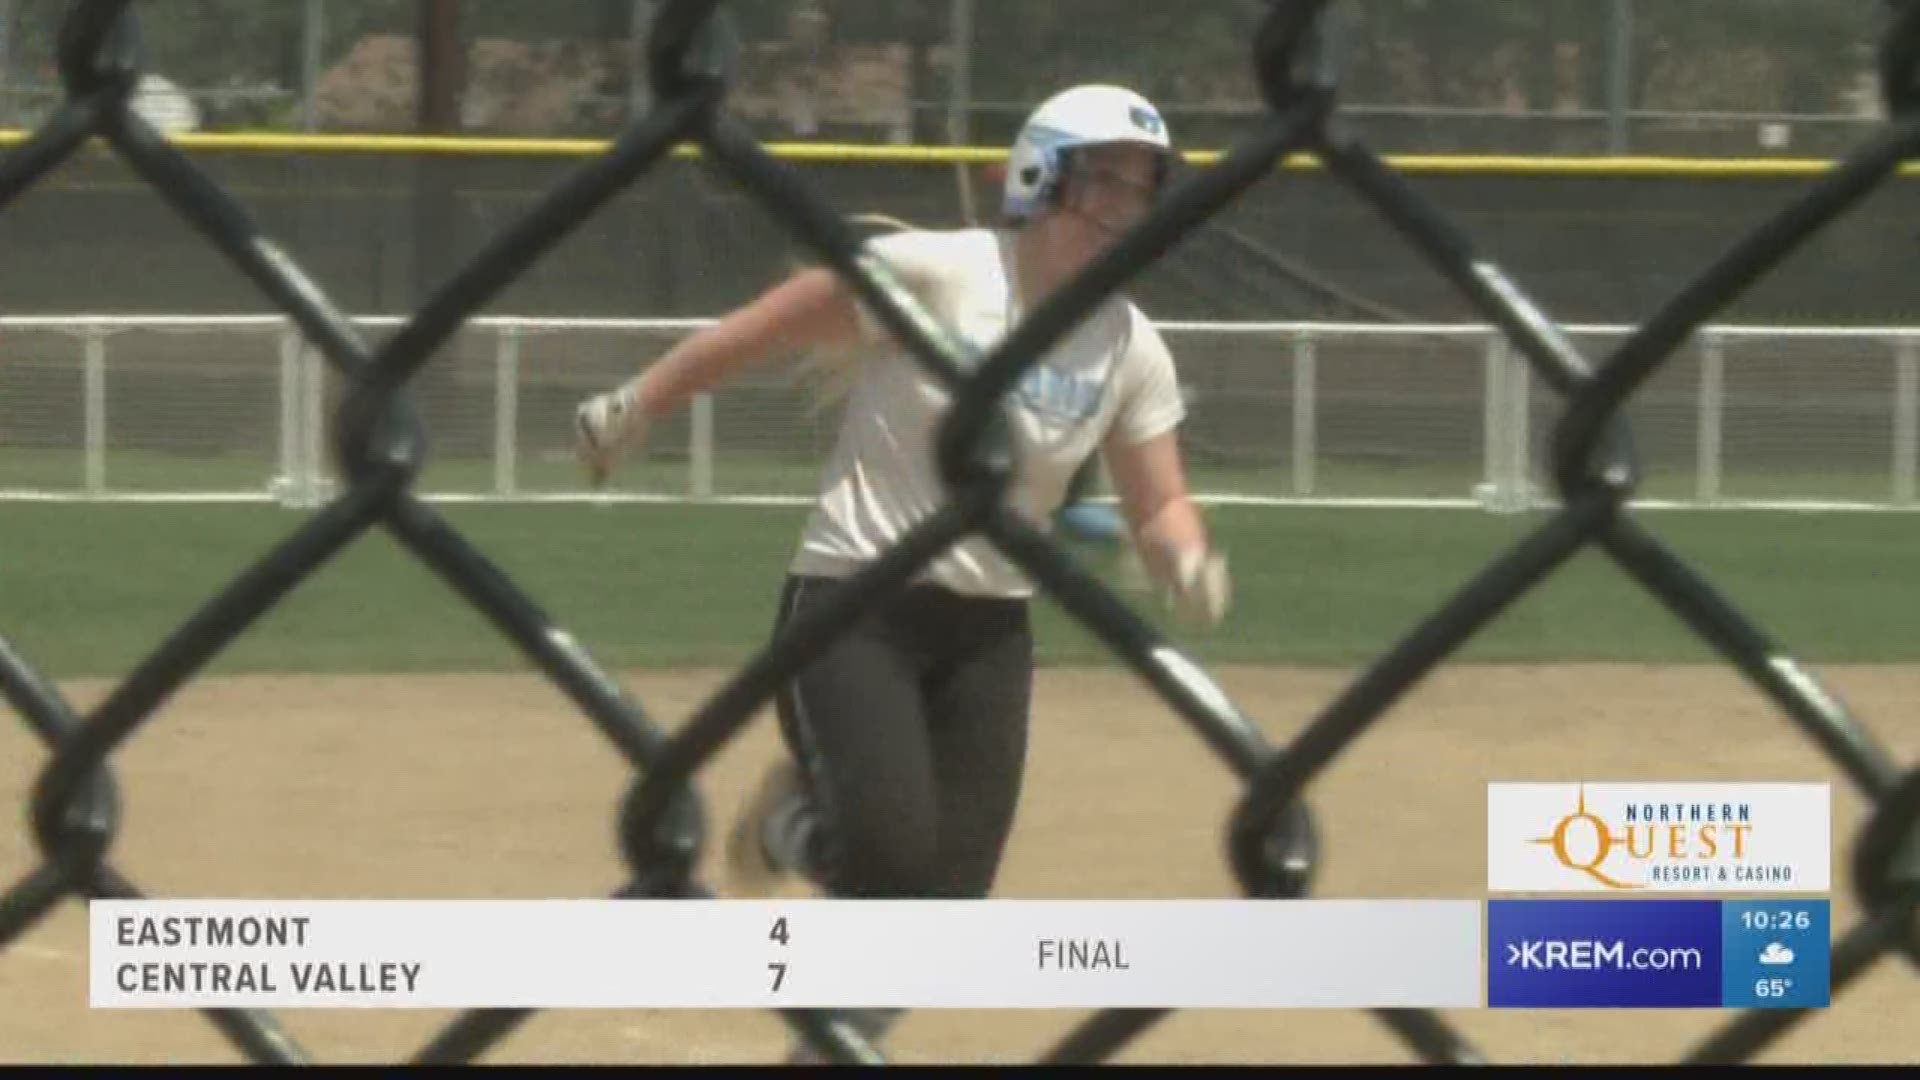 Central Valley advances to semifinals while University and Moses Lake are bounced.